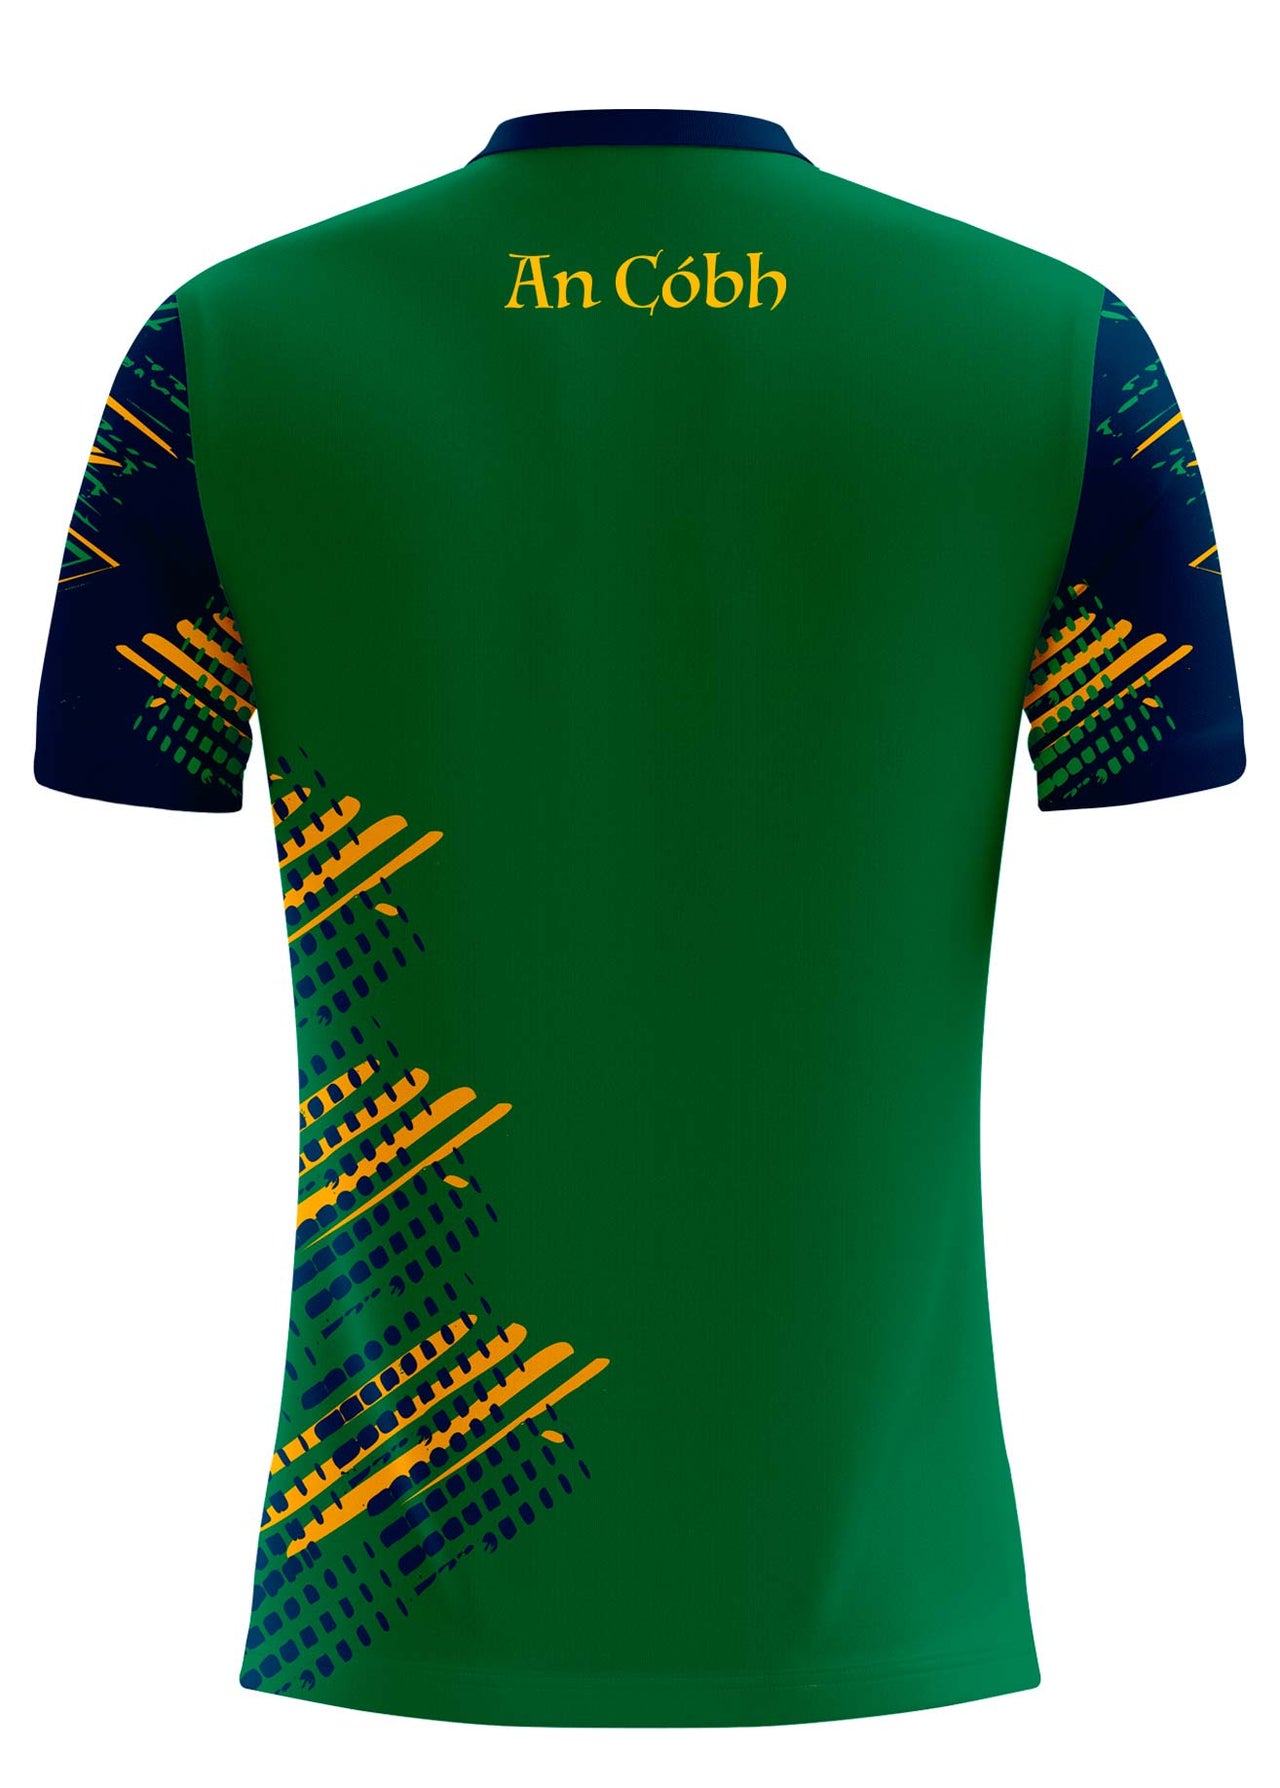 Cobh Camogie Training Jersey Regular Fit Adult